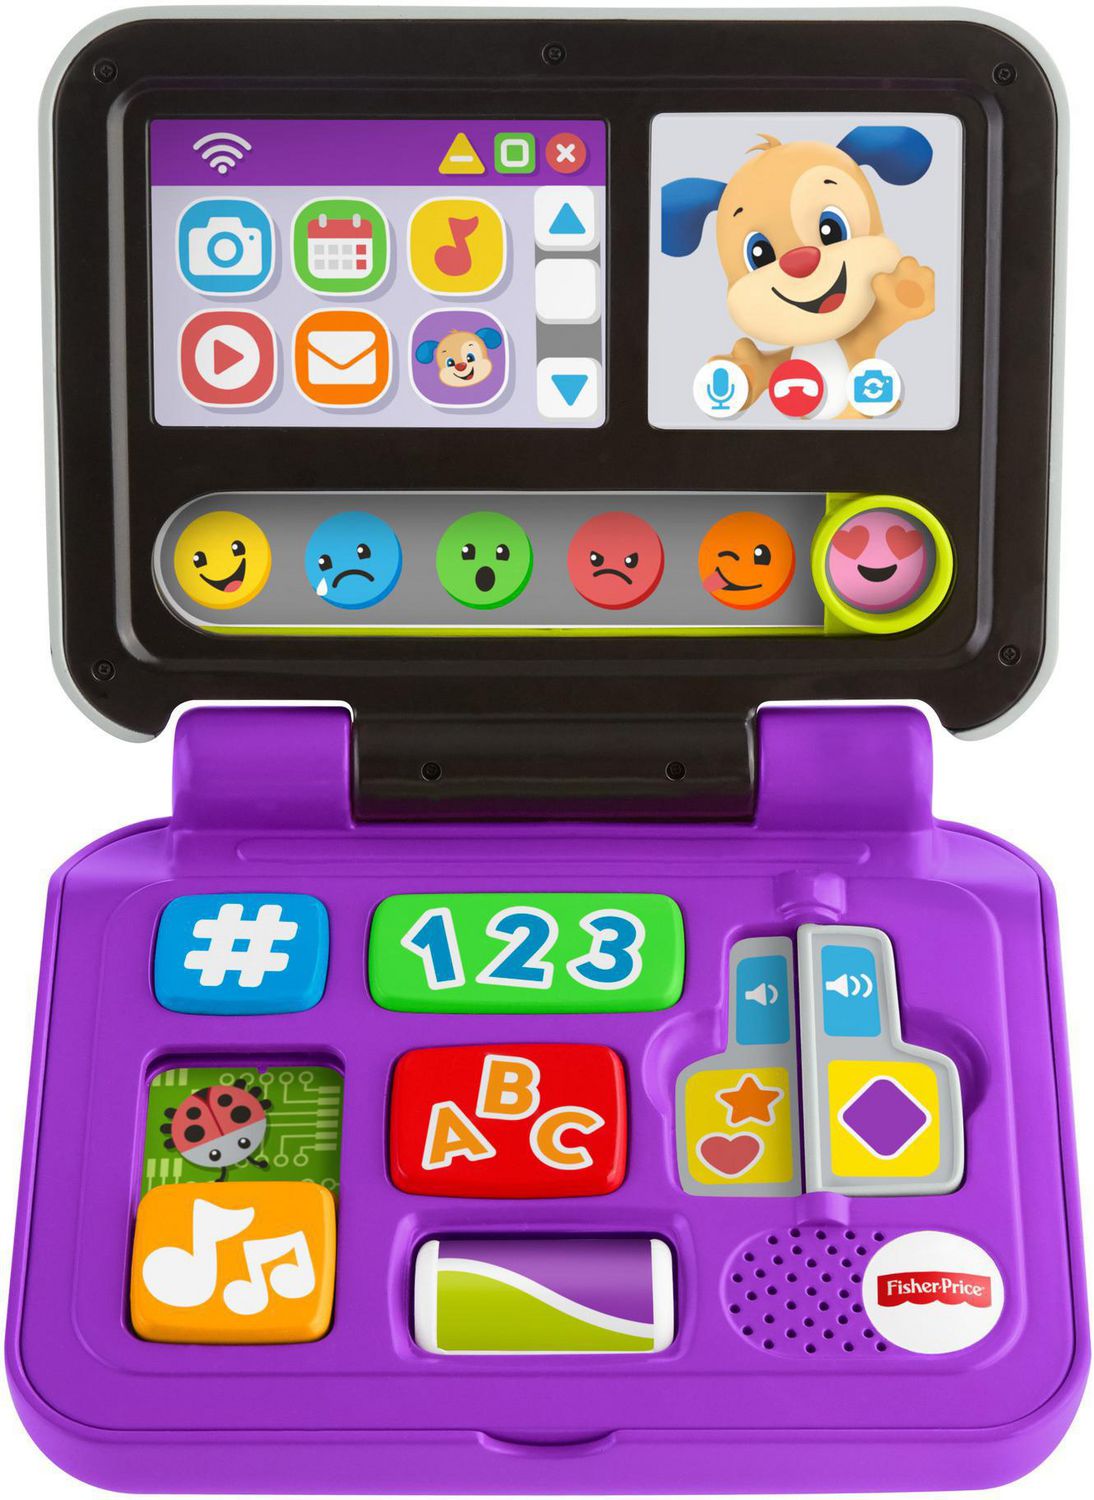 fisher price laugh and learn laptop